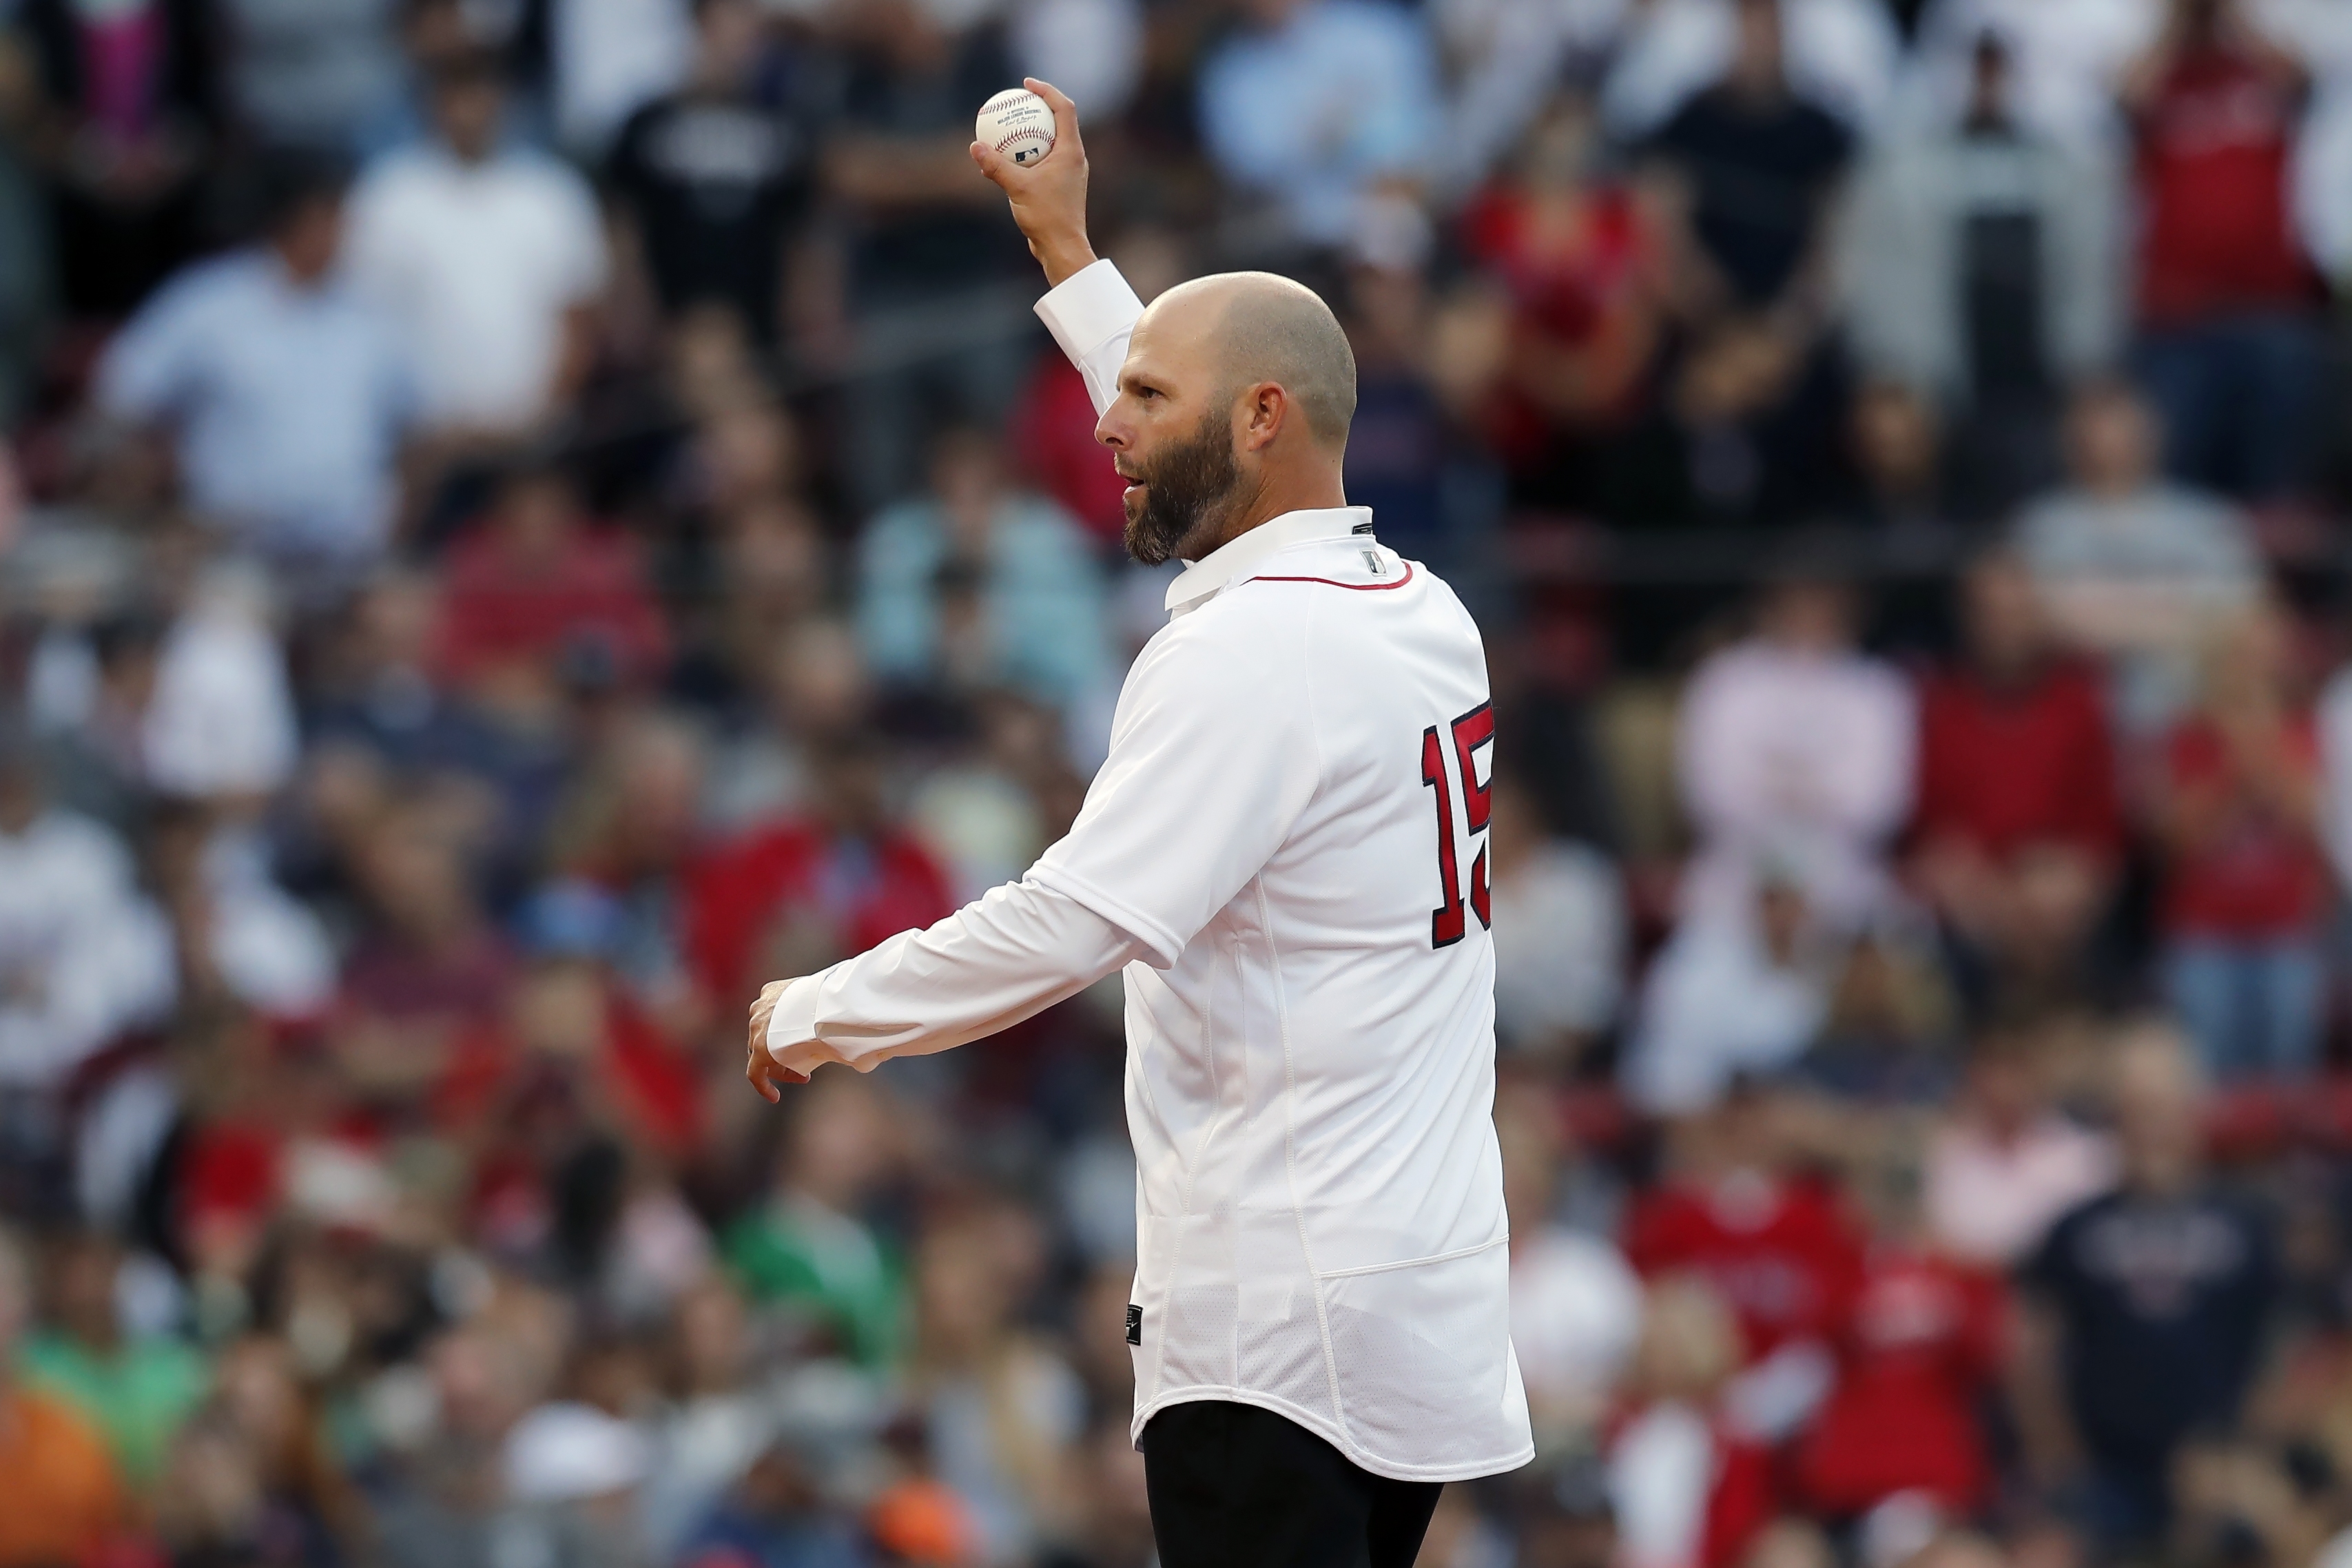 Reflecting on the Latest Dustin Pedroia News — Thoughts From The Mill